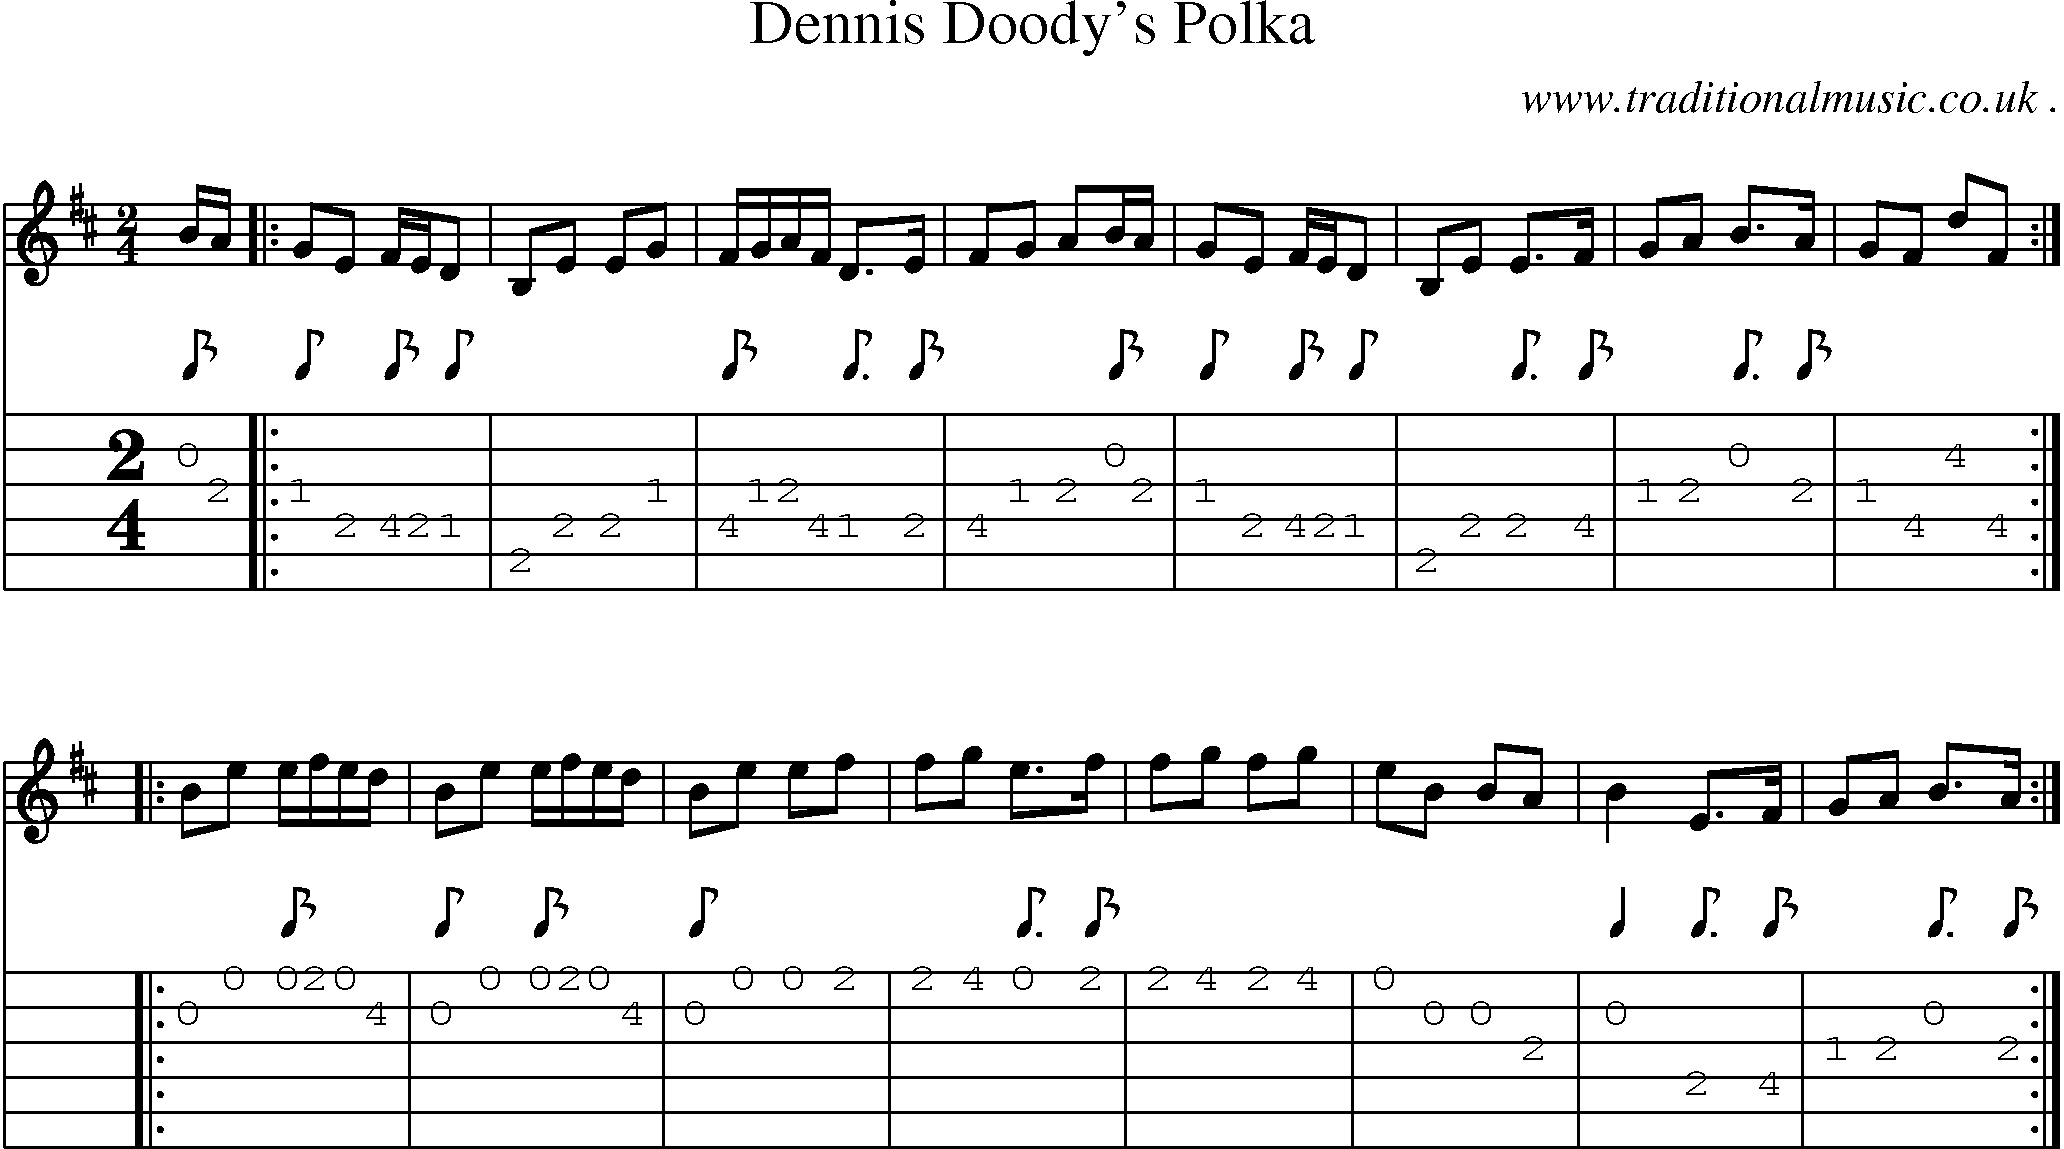 Sheet-Music and Guitar Tabs for Dennis Doodys Polka